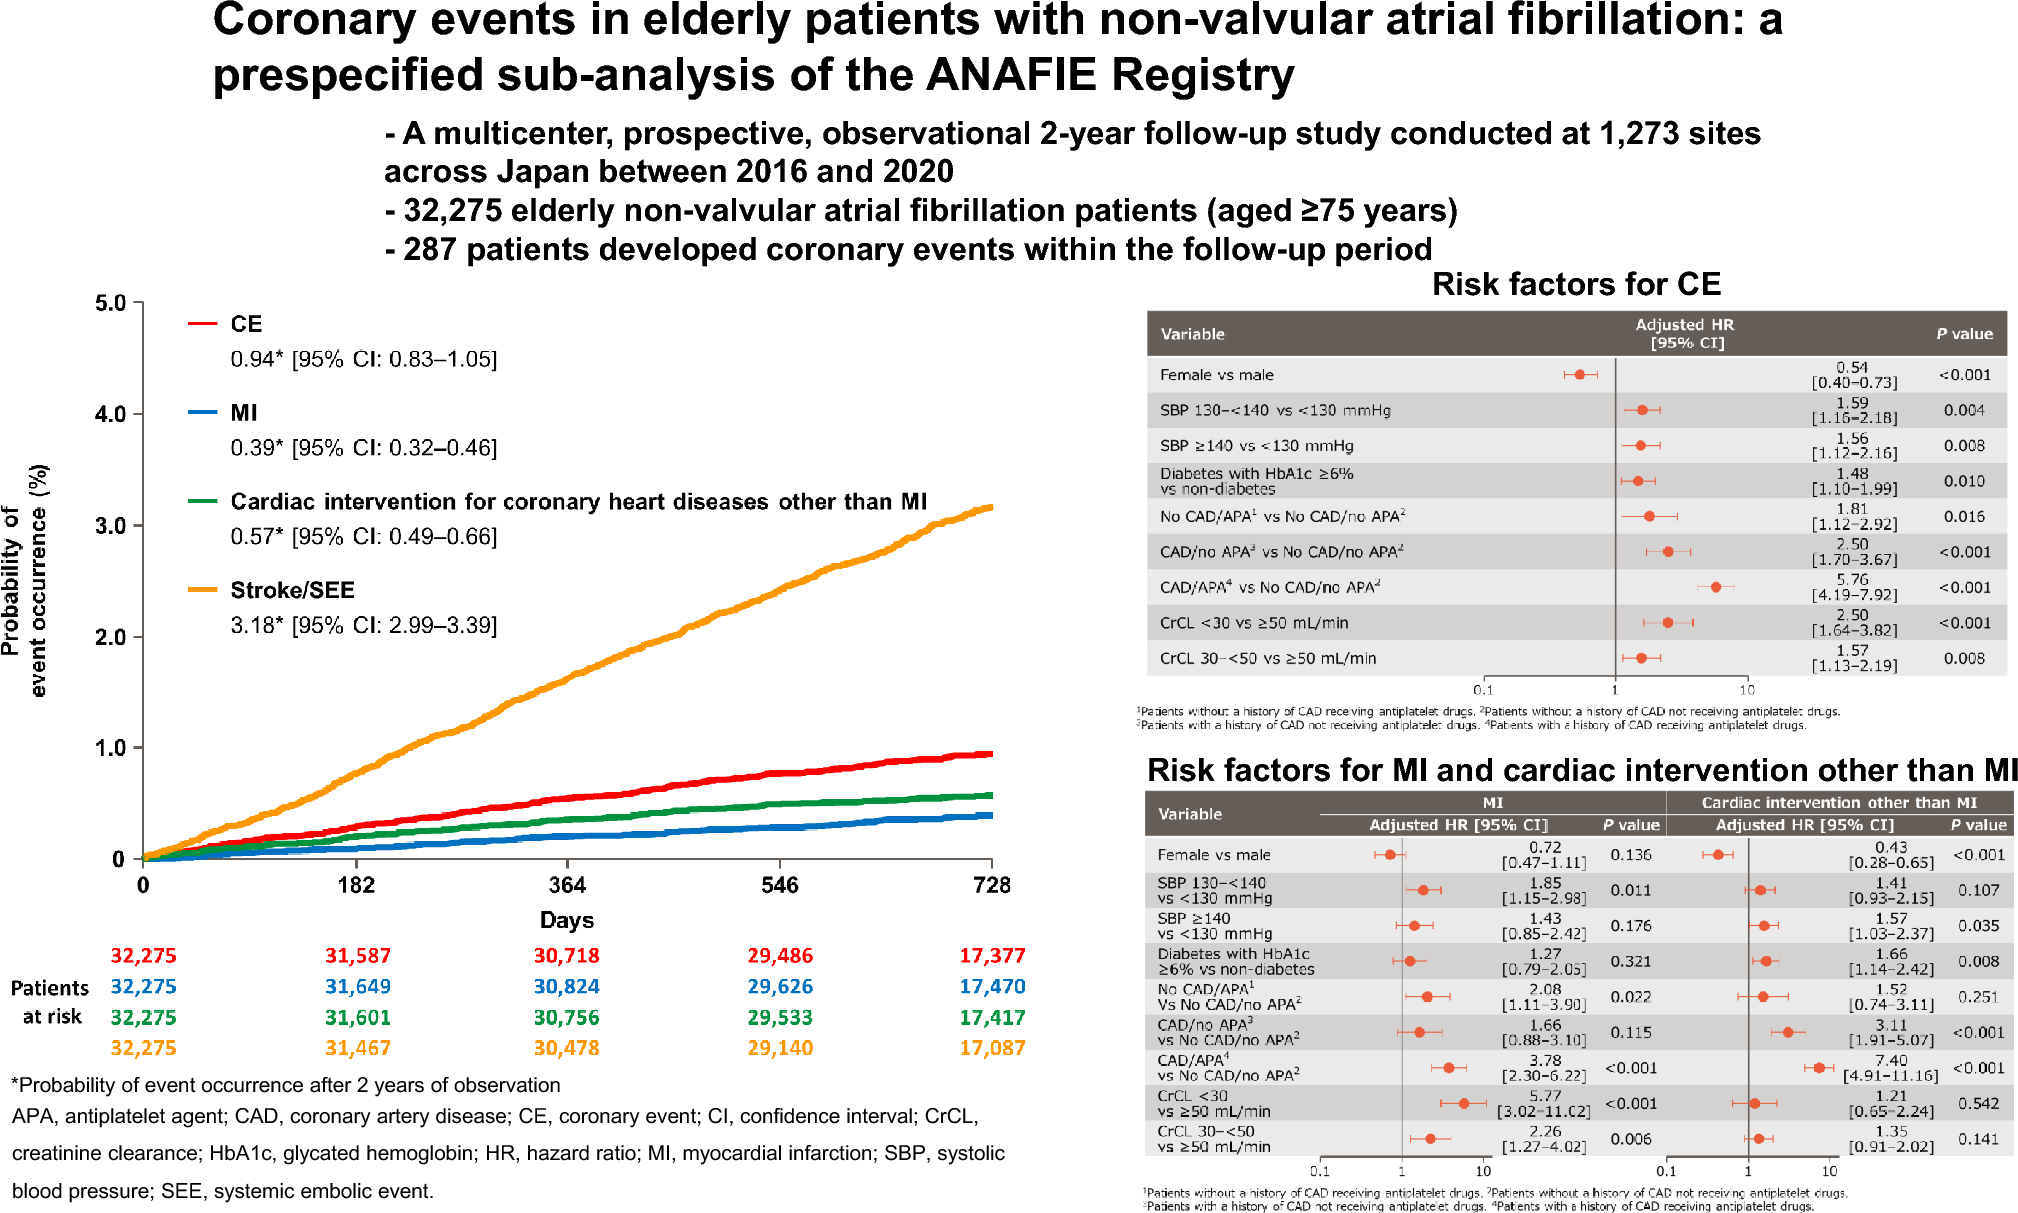 Coronary events in elderly patients with non-valvular atrial fibrillation: a prespecified sub-analysis of the ANAFIE registry